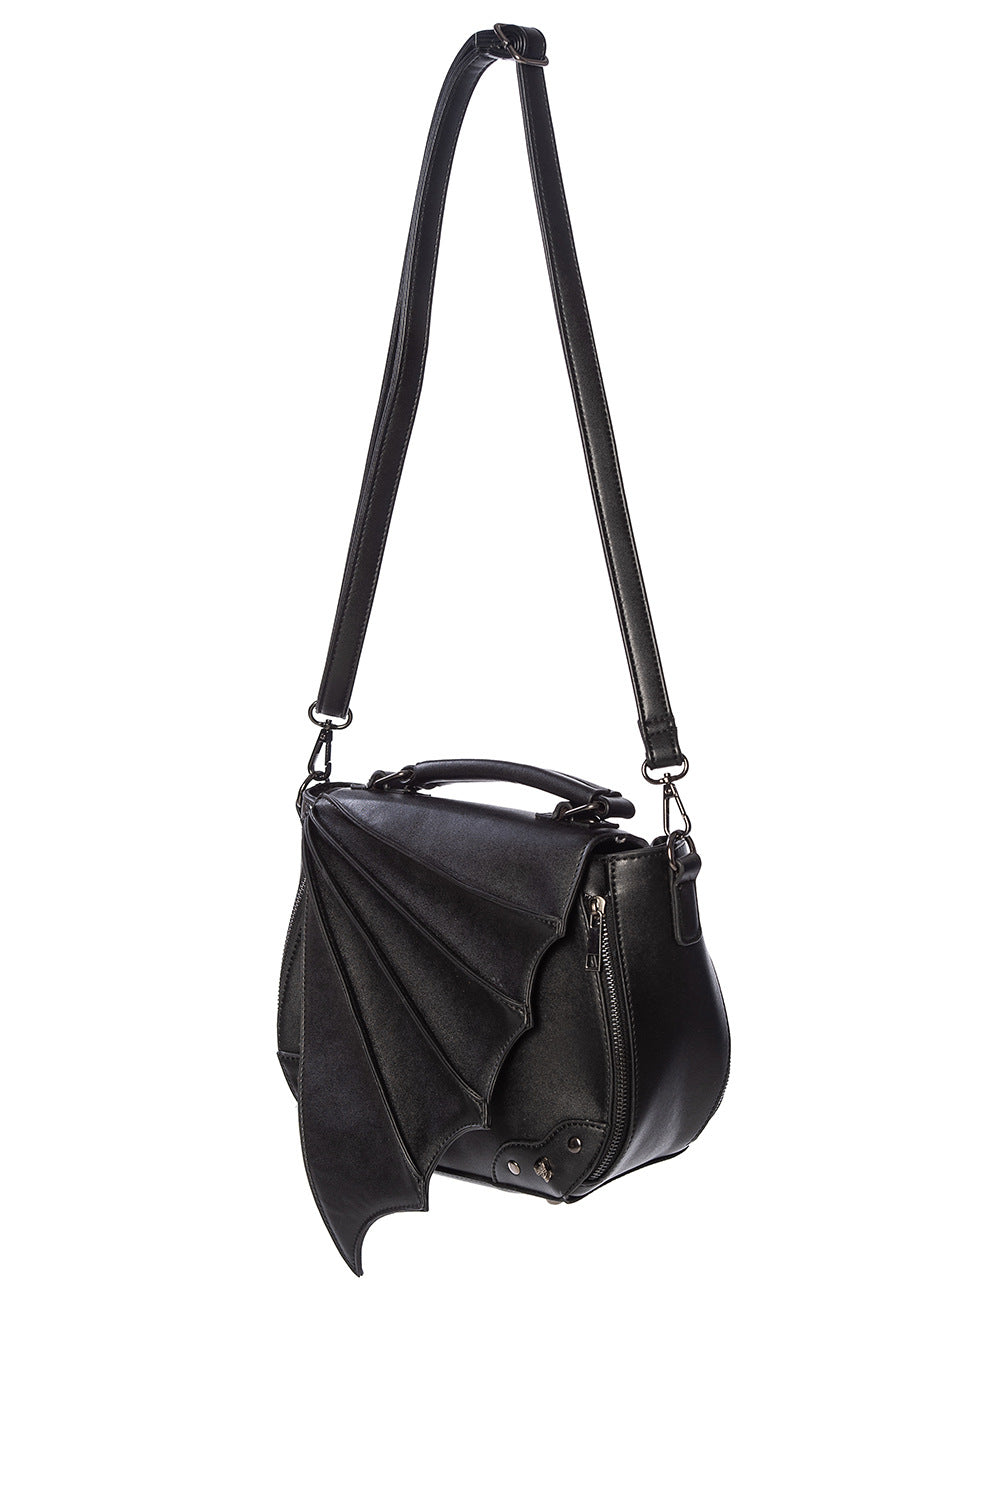 Satchel style handbag in back with bat wing 